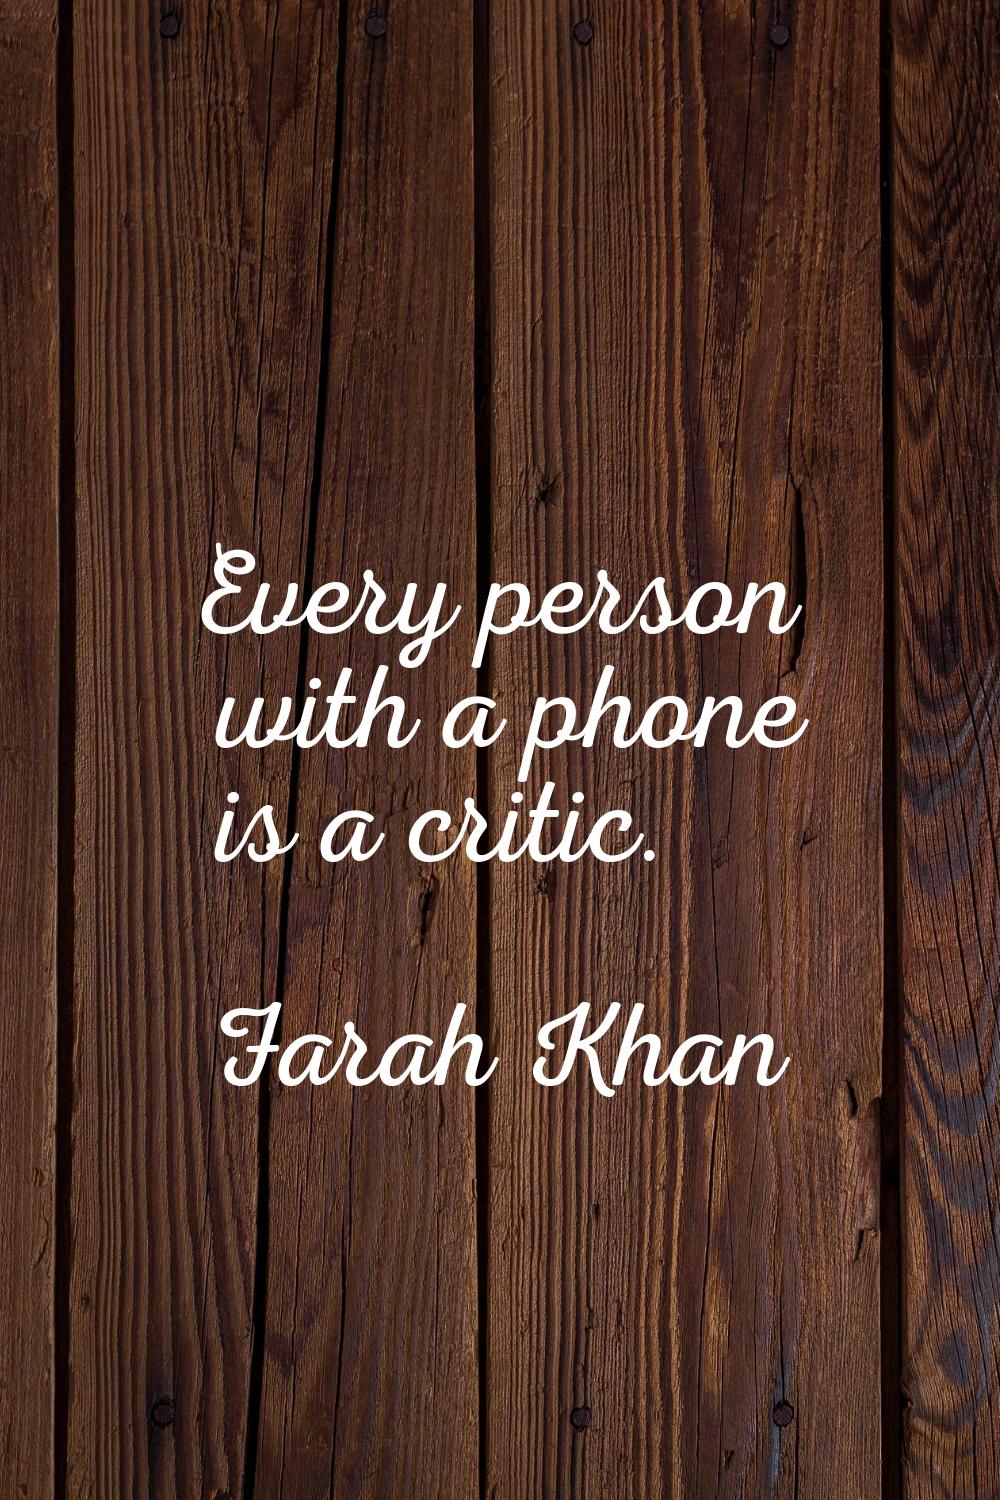 Every person with a phone is a critic.